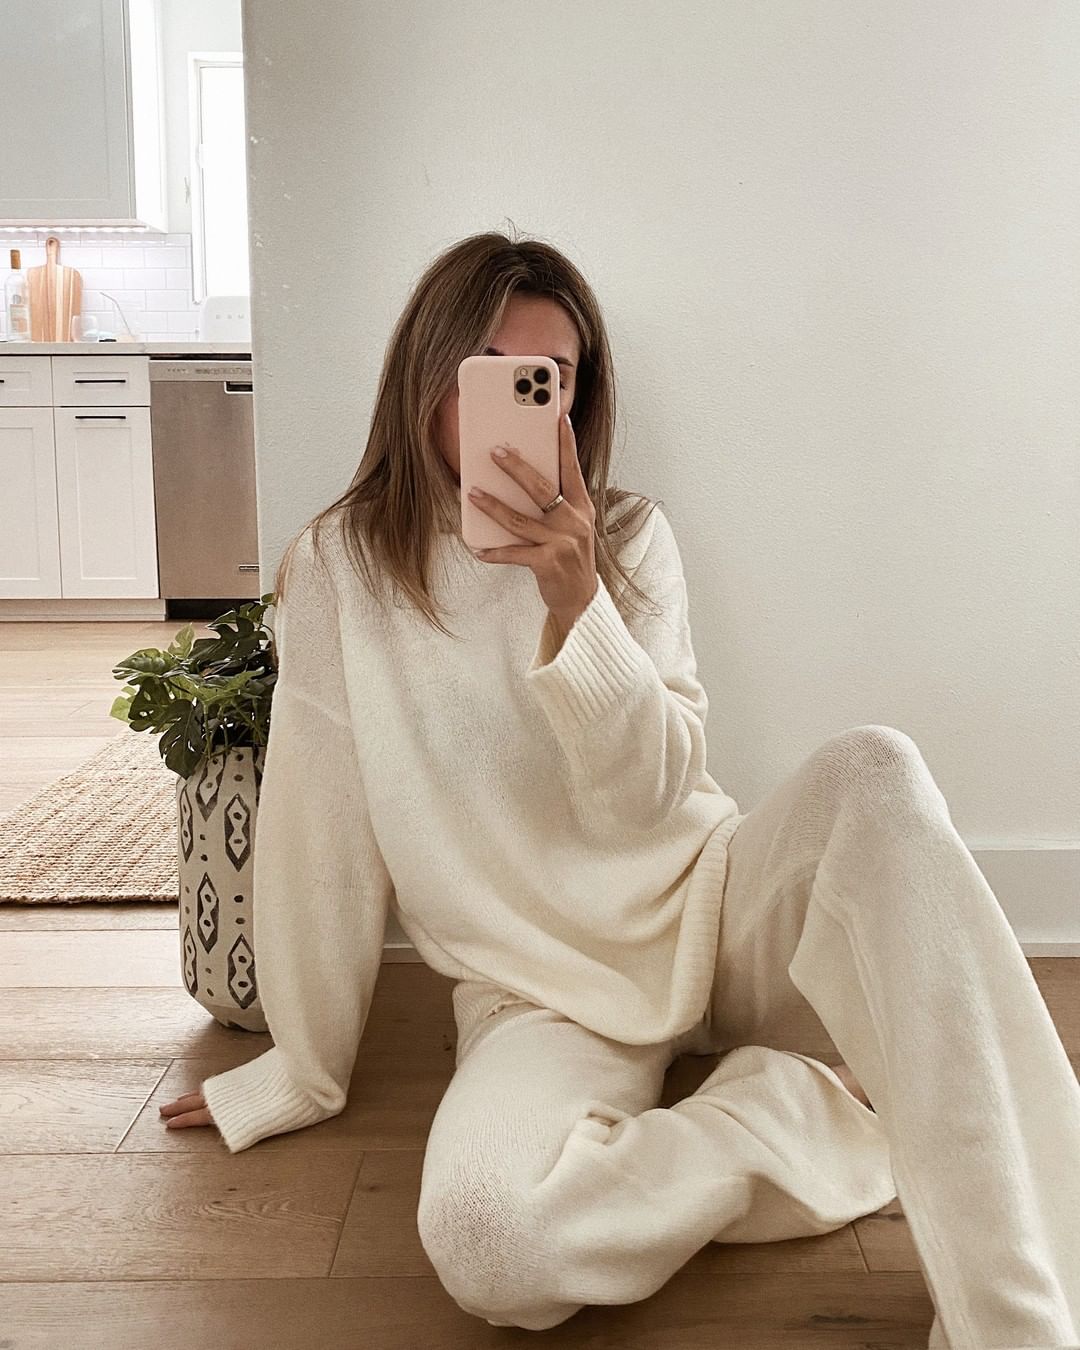 Cool Loungewear Sets for Staying or Working at Home — Tara Michelle Instagram Outift Inspiration